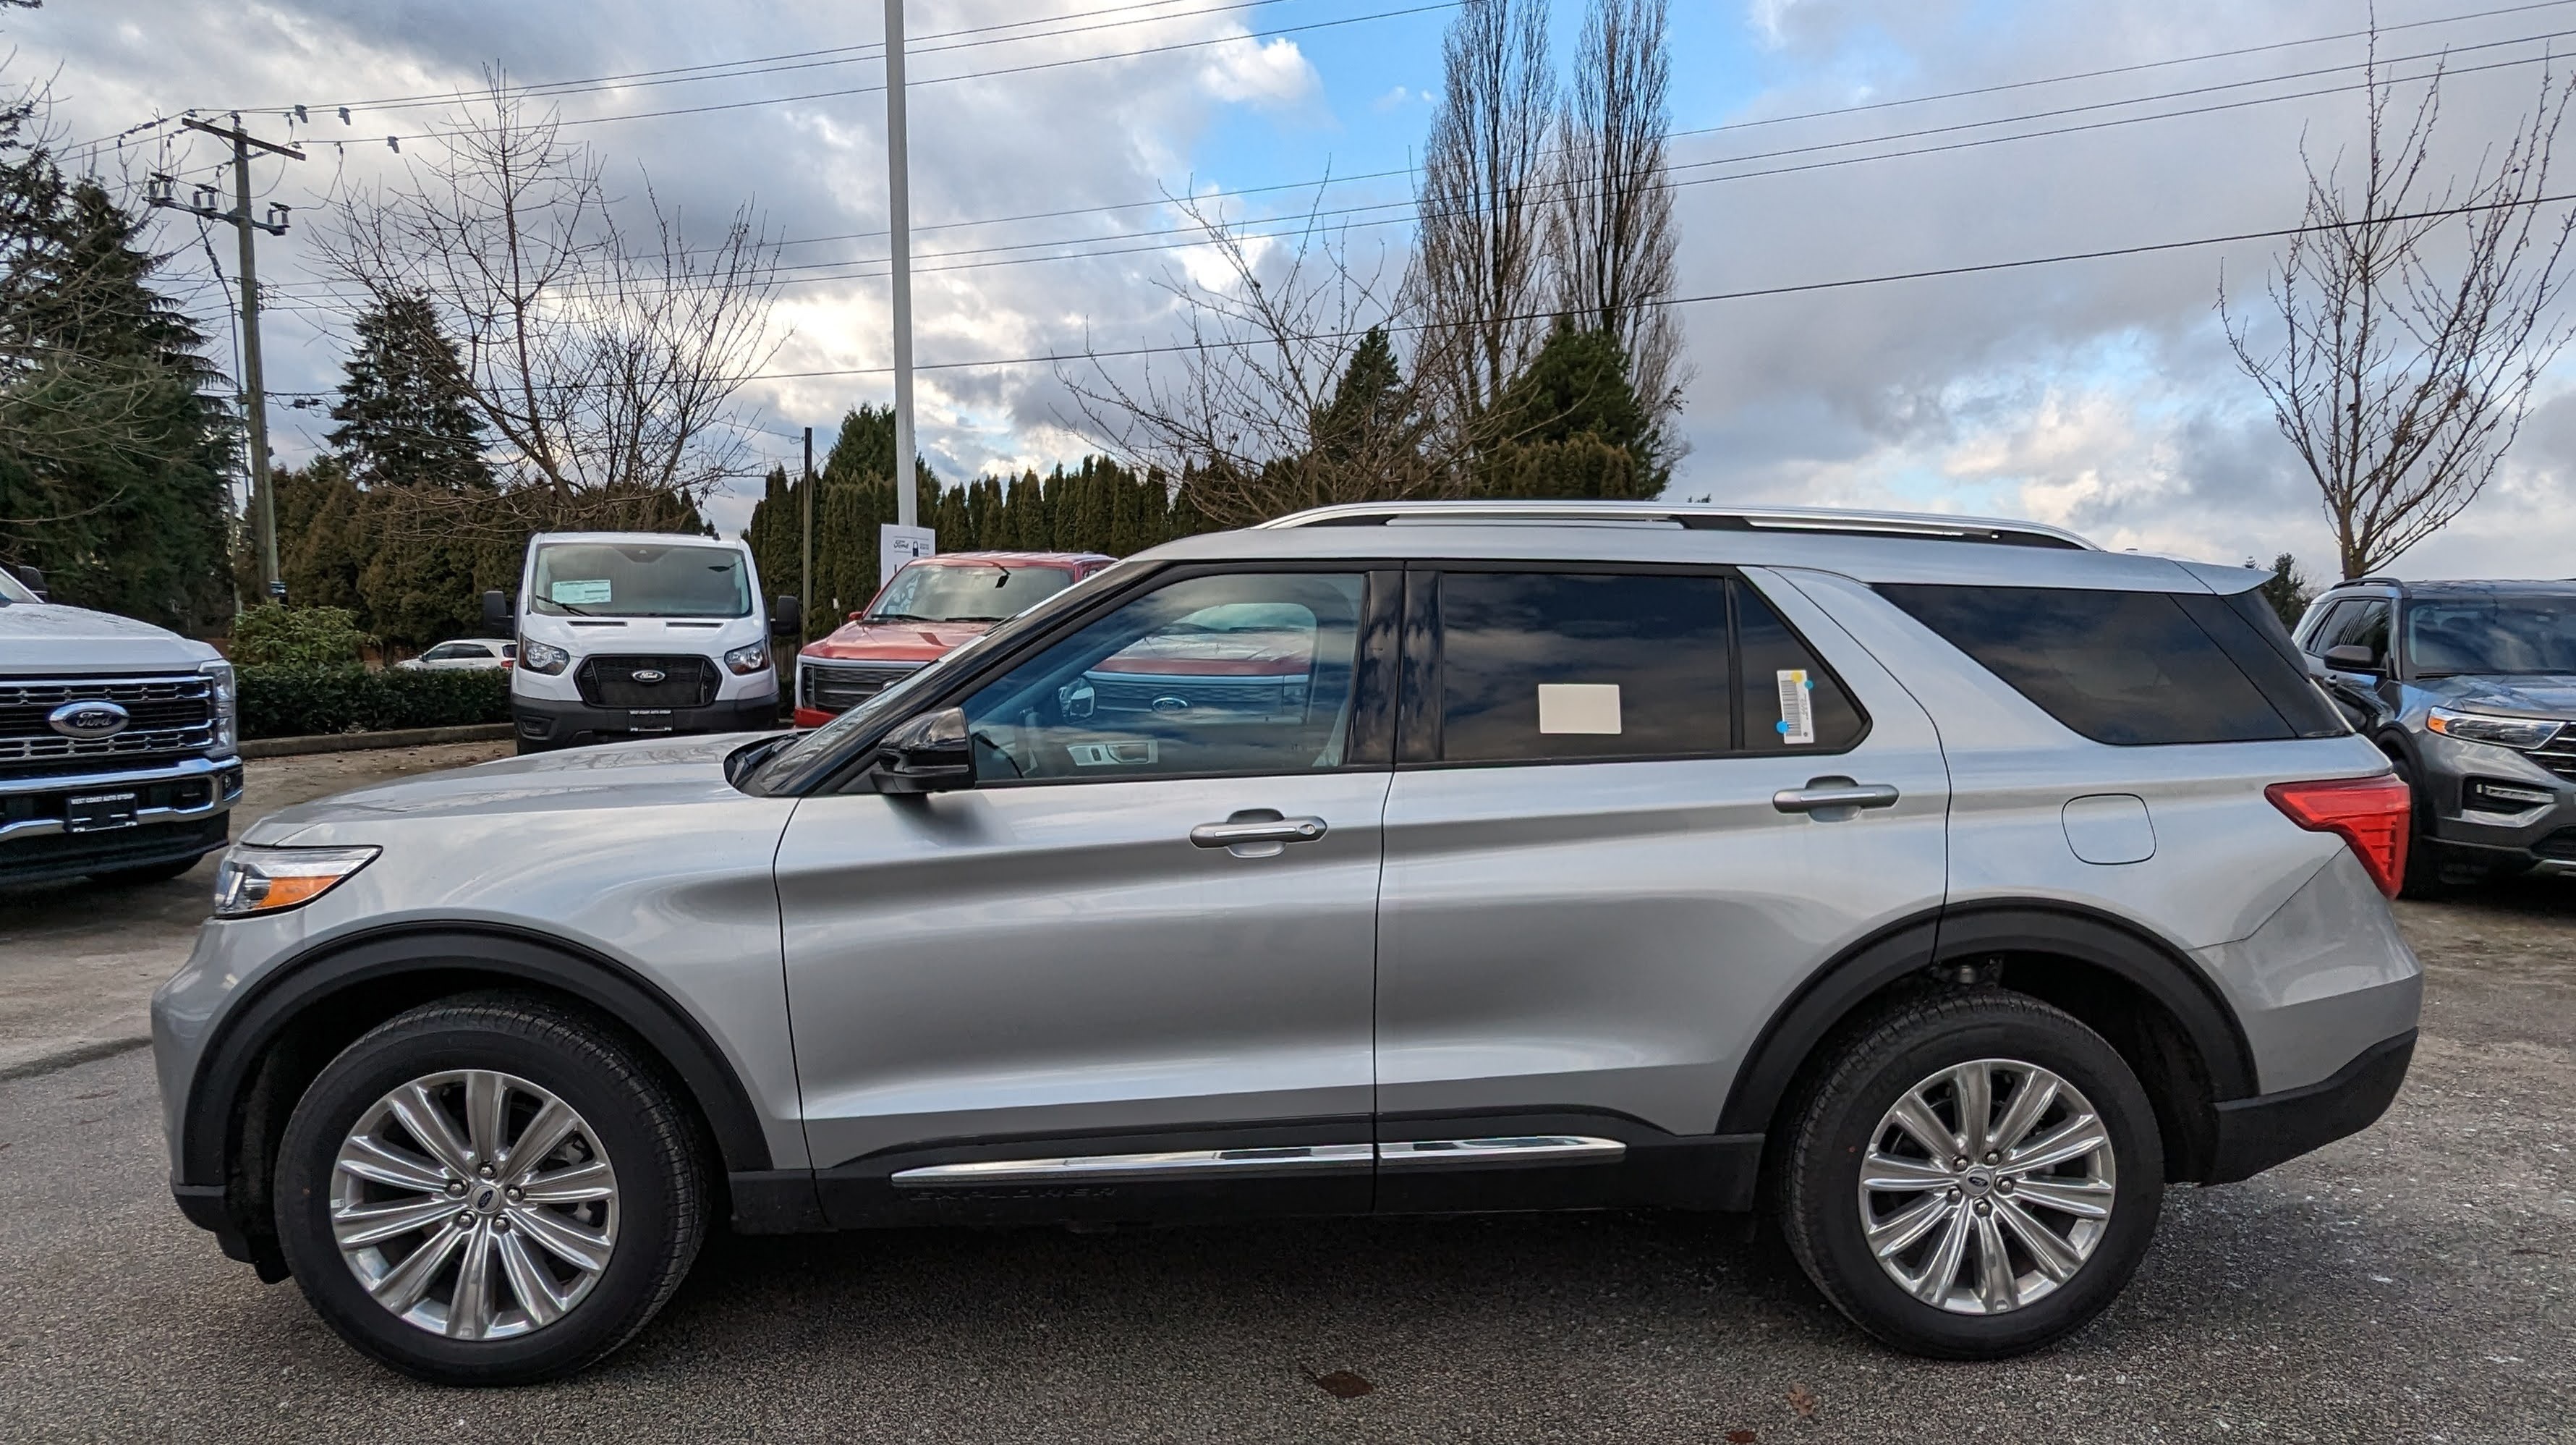 2023 Ford Explorer Limited 4WD - Demo Vehicle